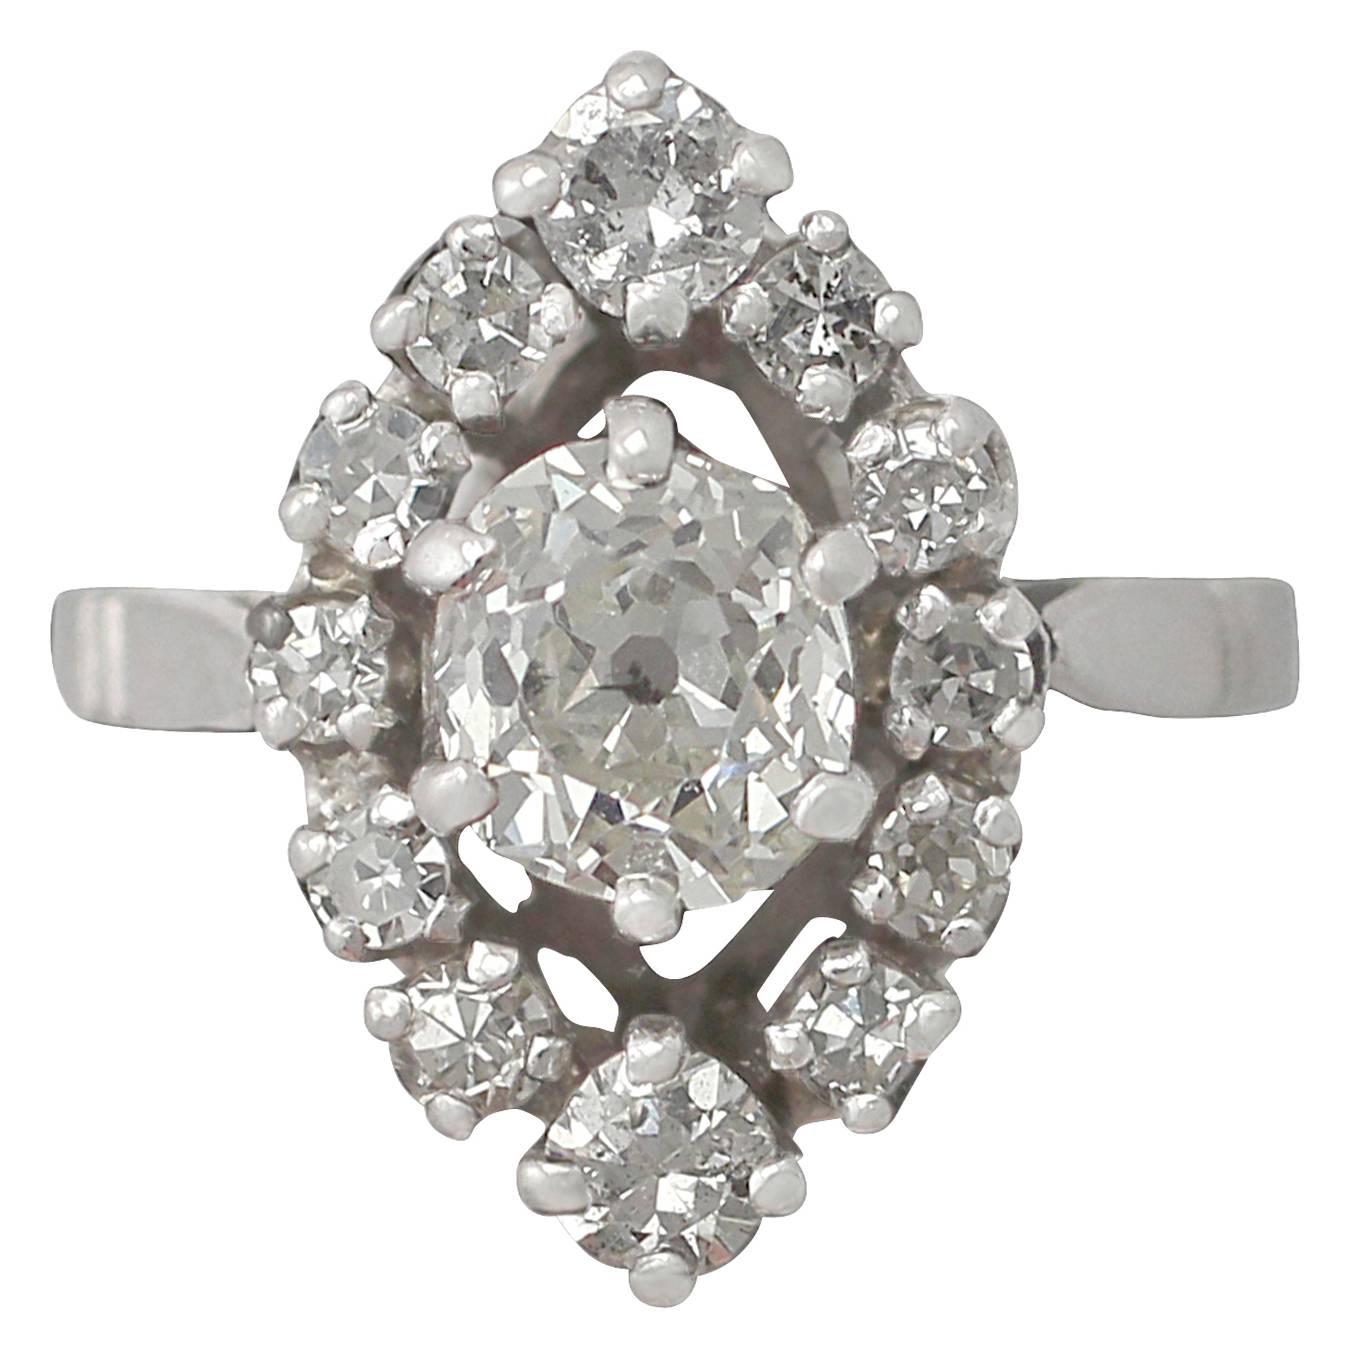 1910s 1.49 Carat Diamond and White Gold Cocktail Ring